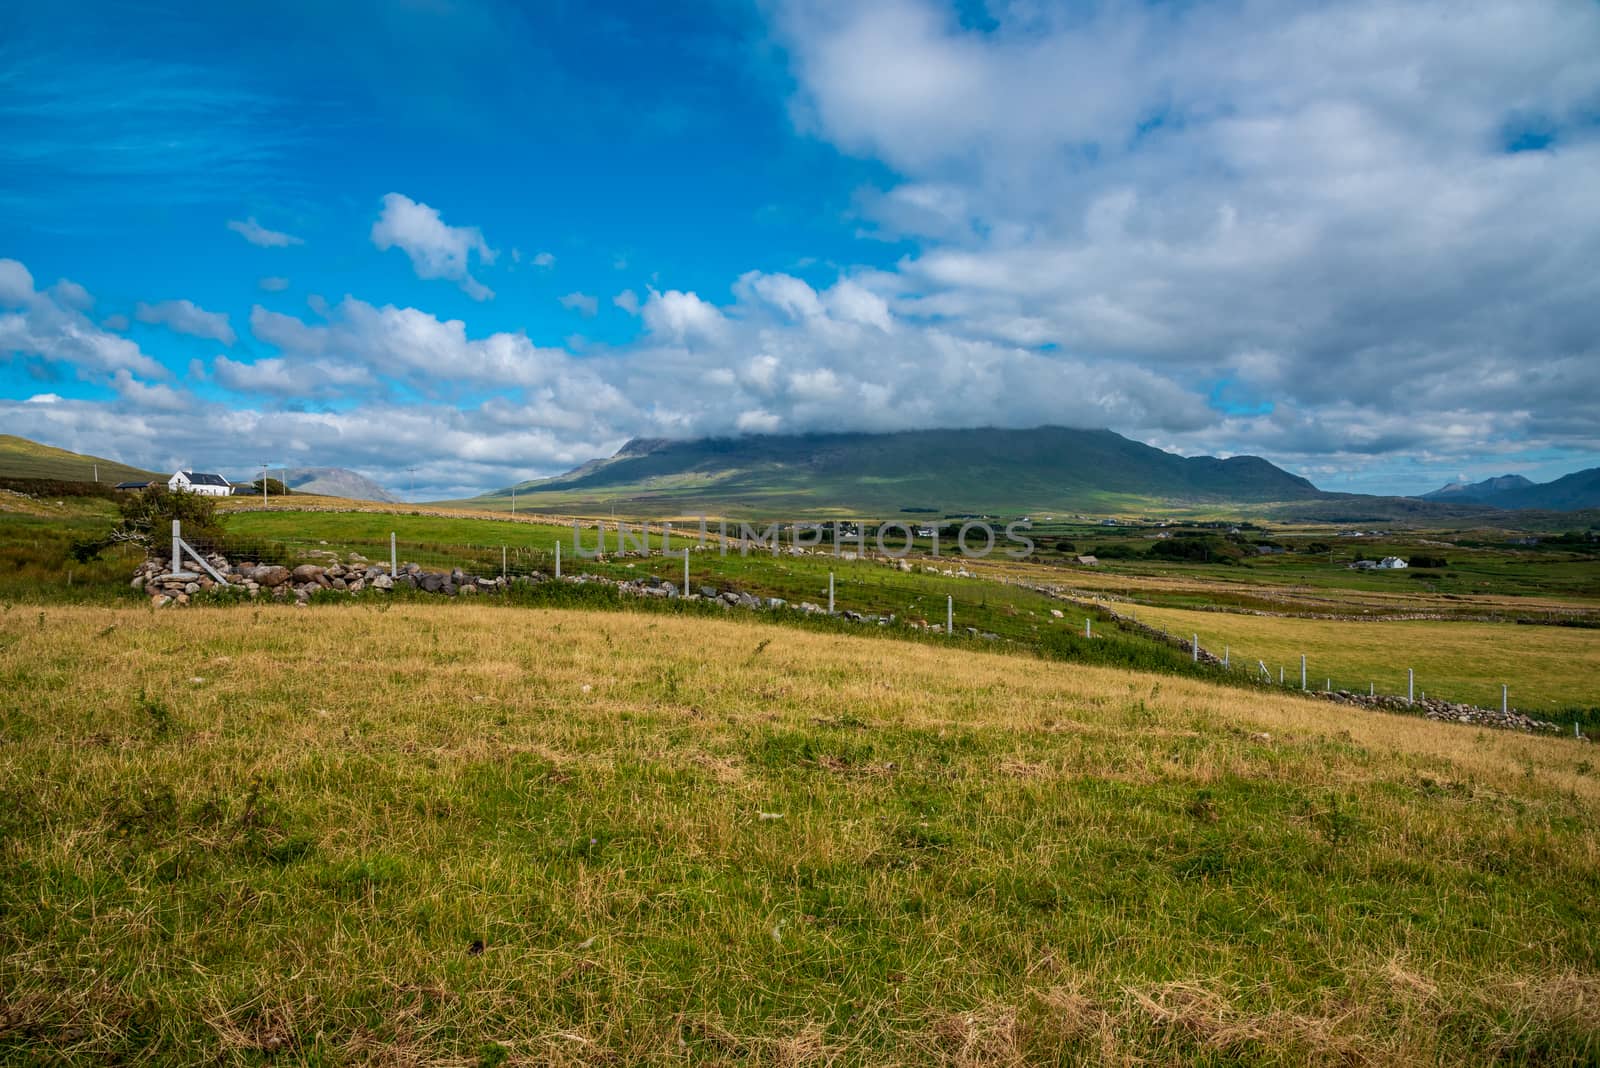 County Mayo Hills and Valleys by jfbenning